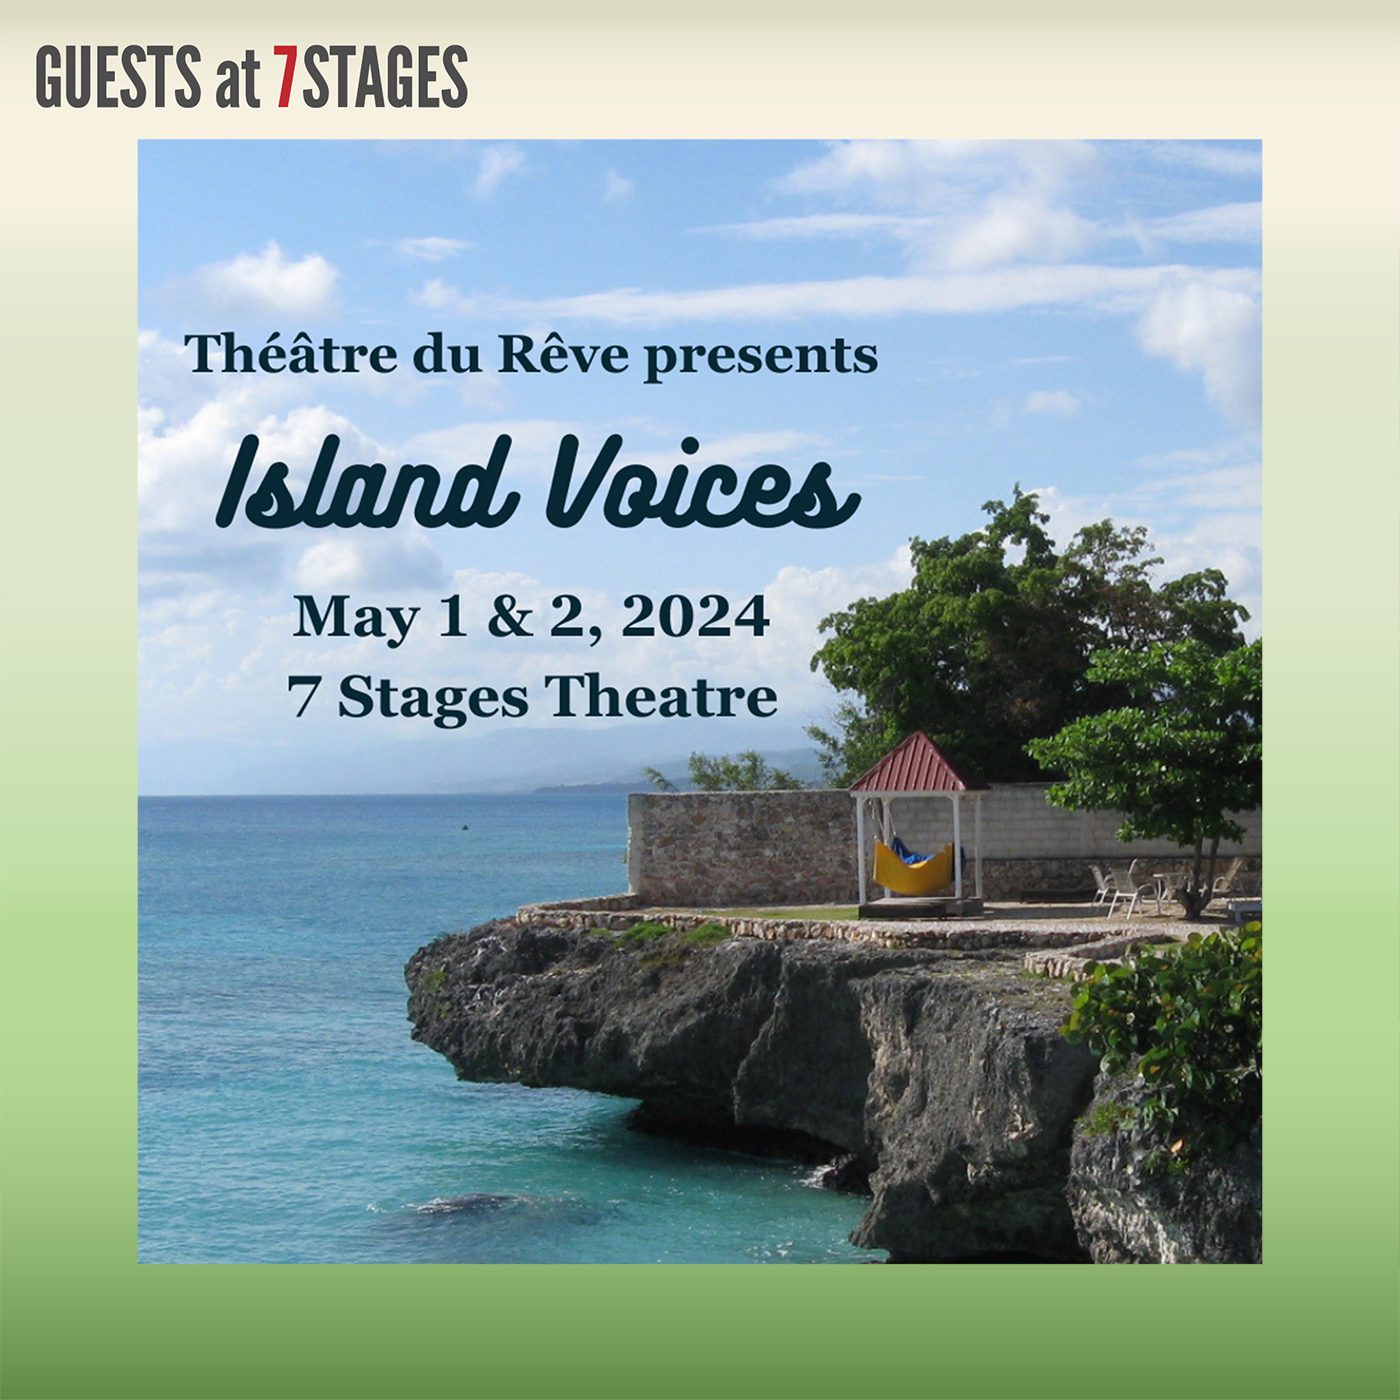 Guests at 7 Stages. Theatre du Reve presents Island Voices. May 1 and 2, 2024. 7 Stages Theatre